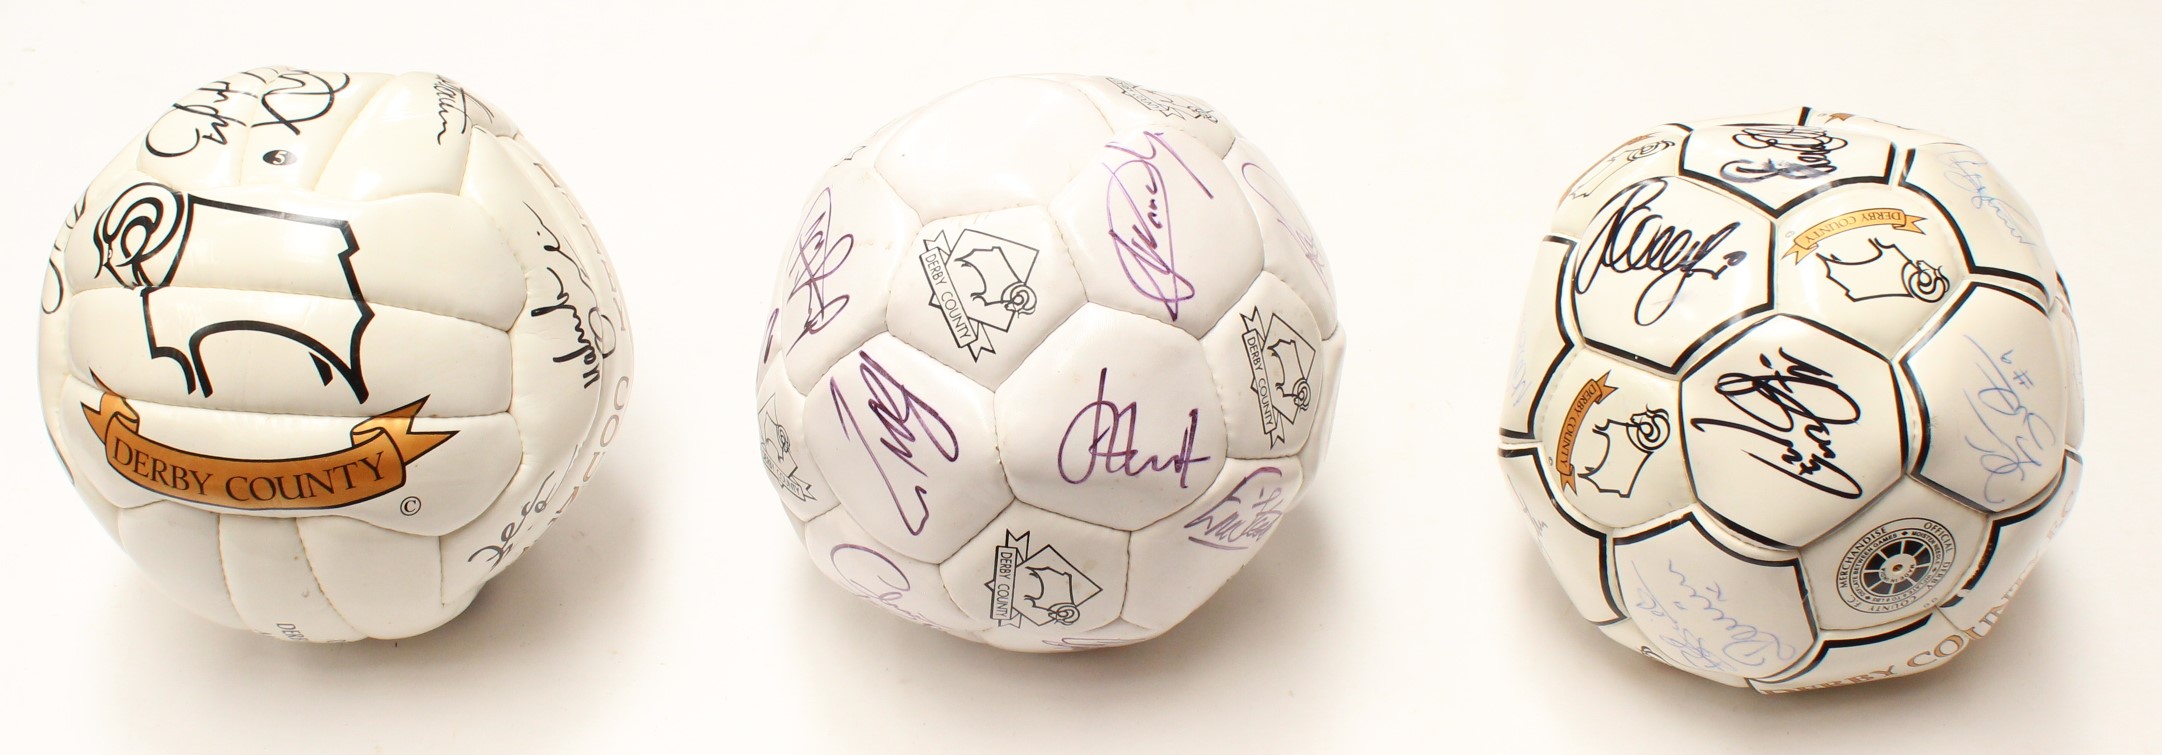 Derby County: A collection of three Derby County signed footballs, dating between 1990s and early